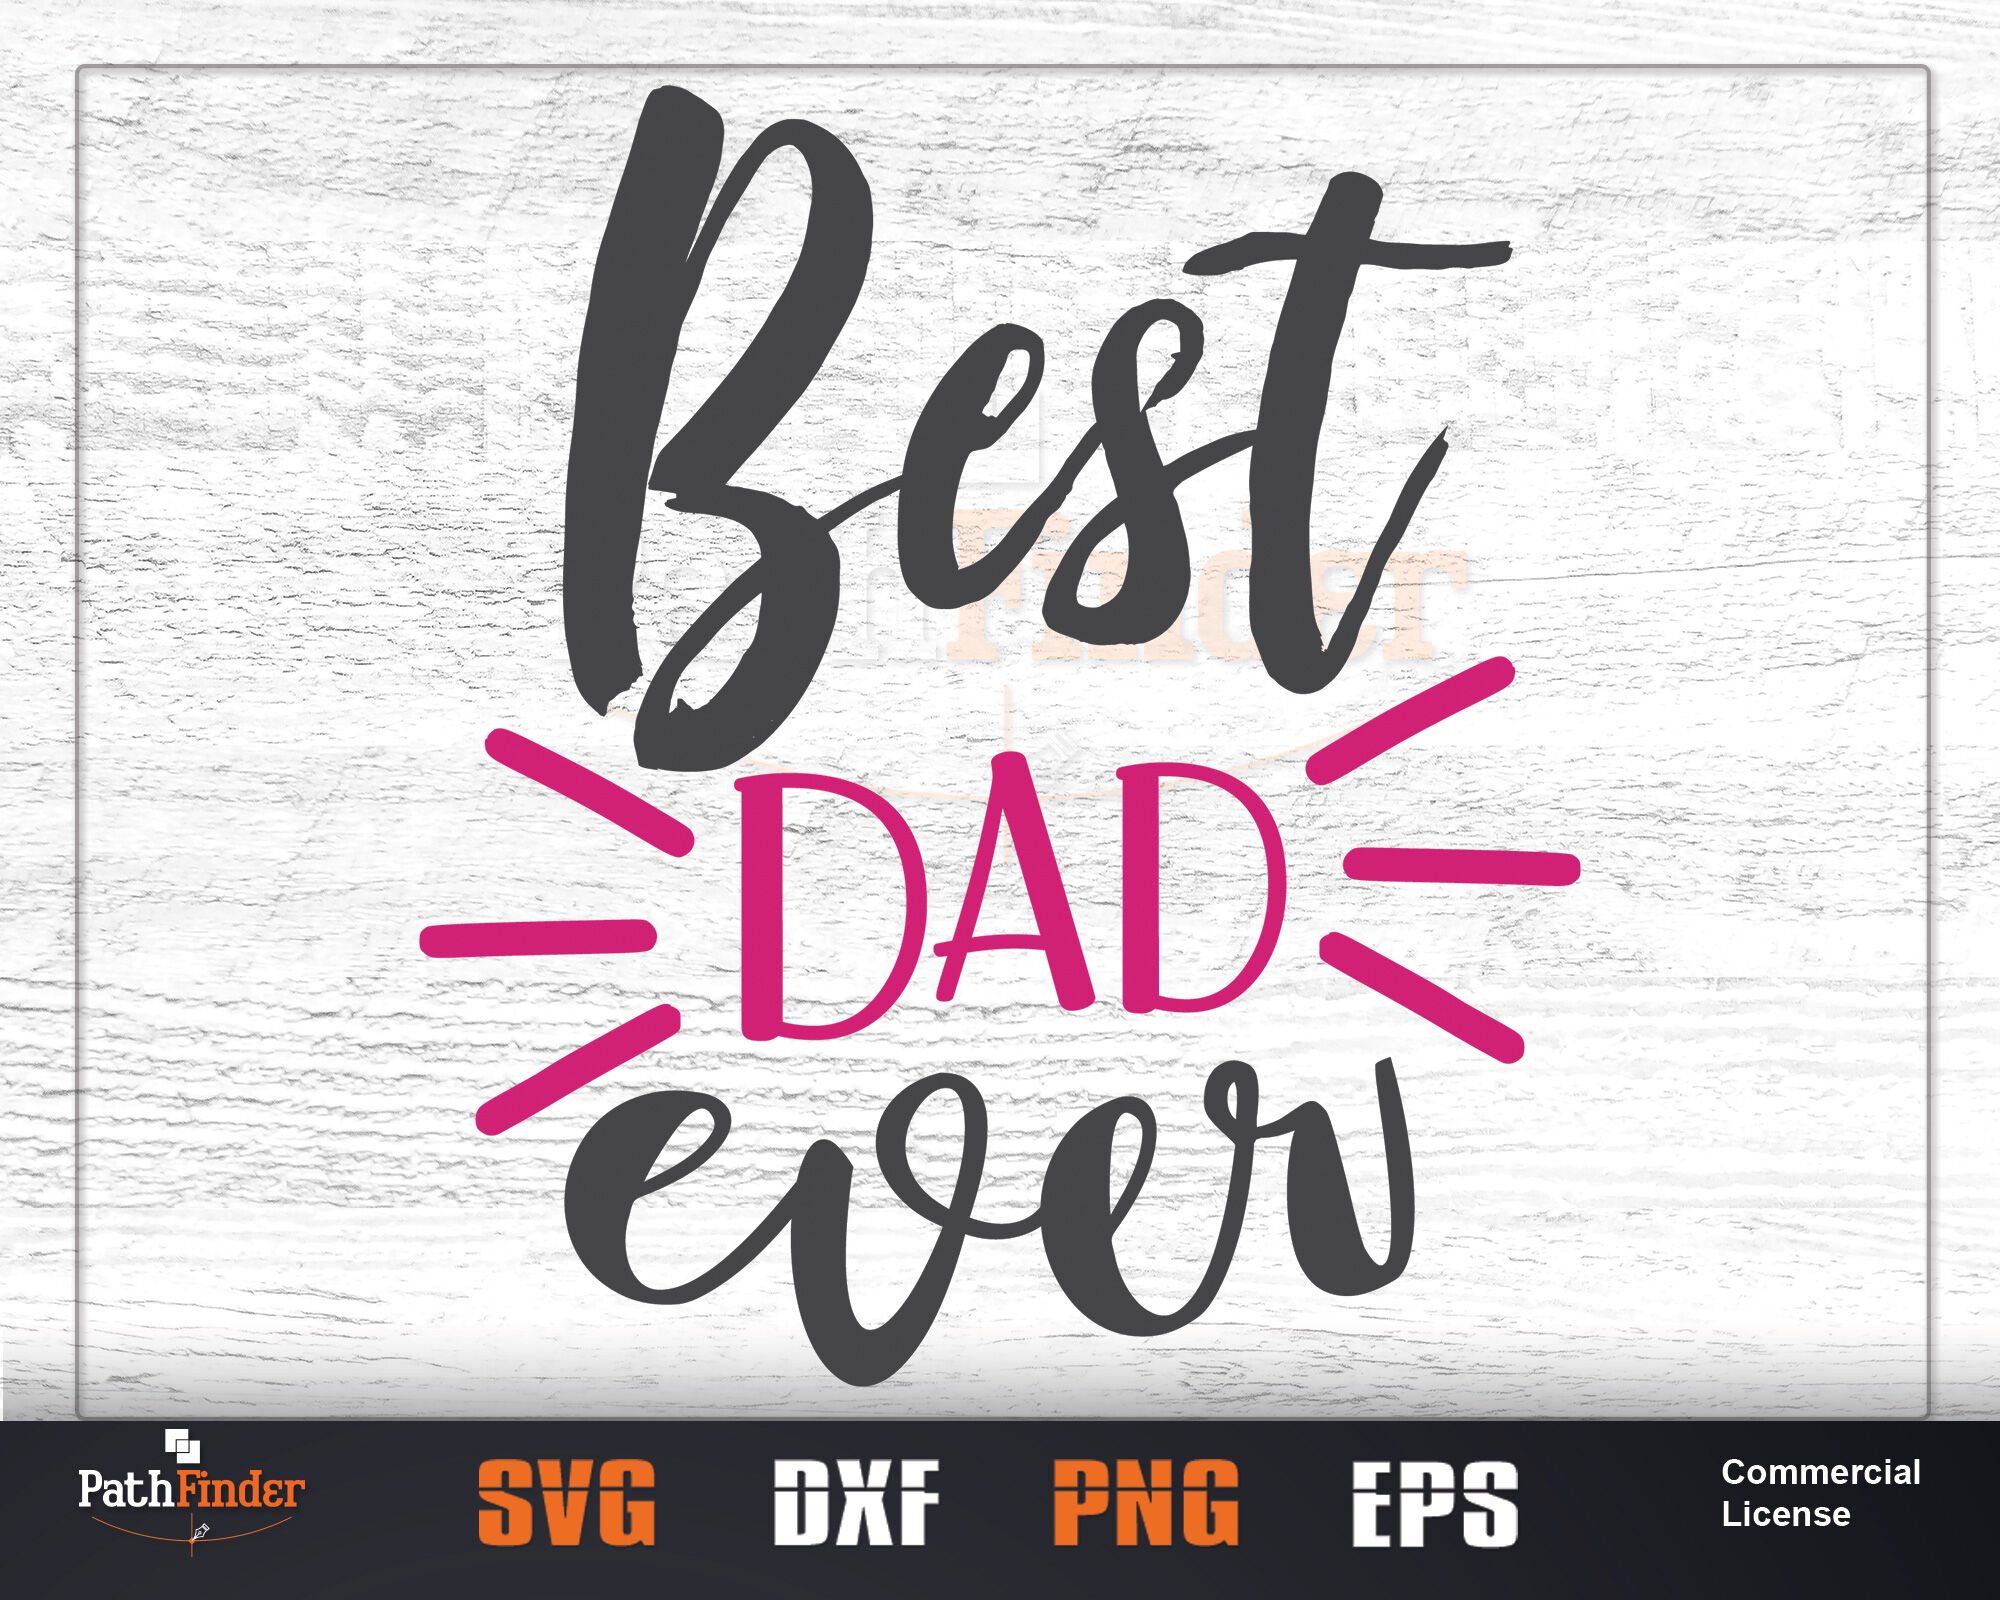 Download Best Dad Ever Dad Svg Best Daddy Ever Best Papa Ever Daddy Svg By Pathfinder Thehungryjpeg Com